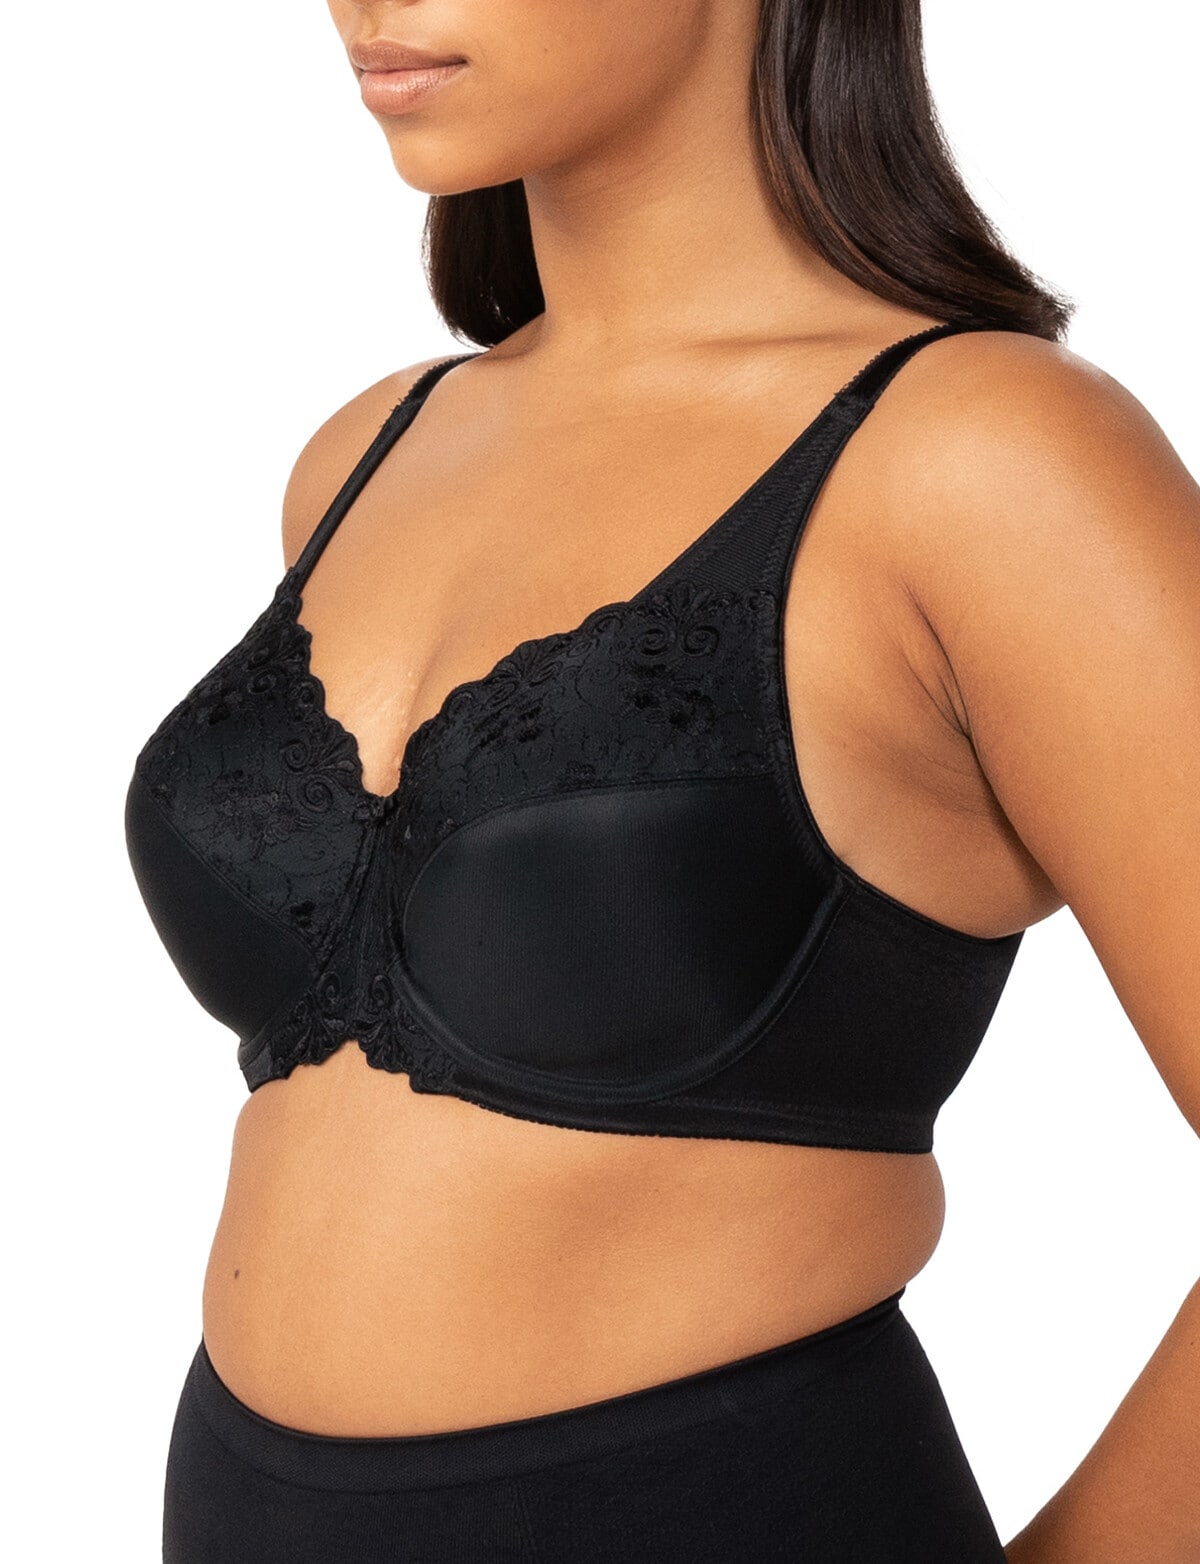 MLG Low Rise Black Criss Cross Sports Bra – Miss Lily Gee Unlimited